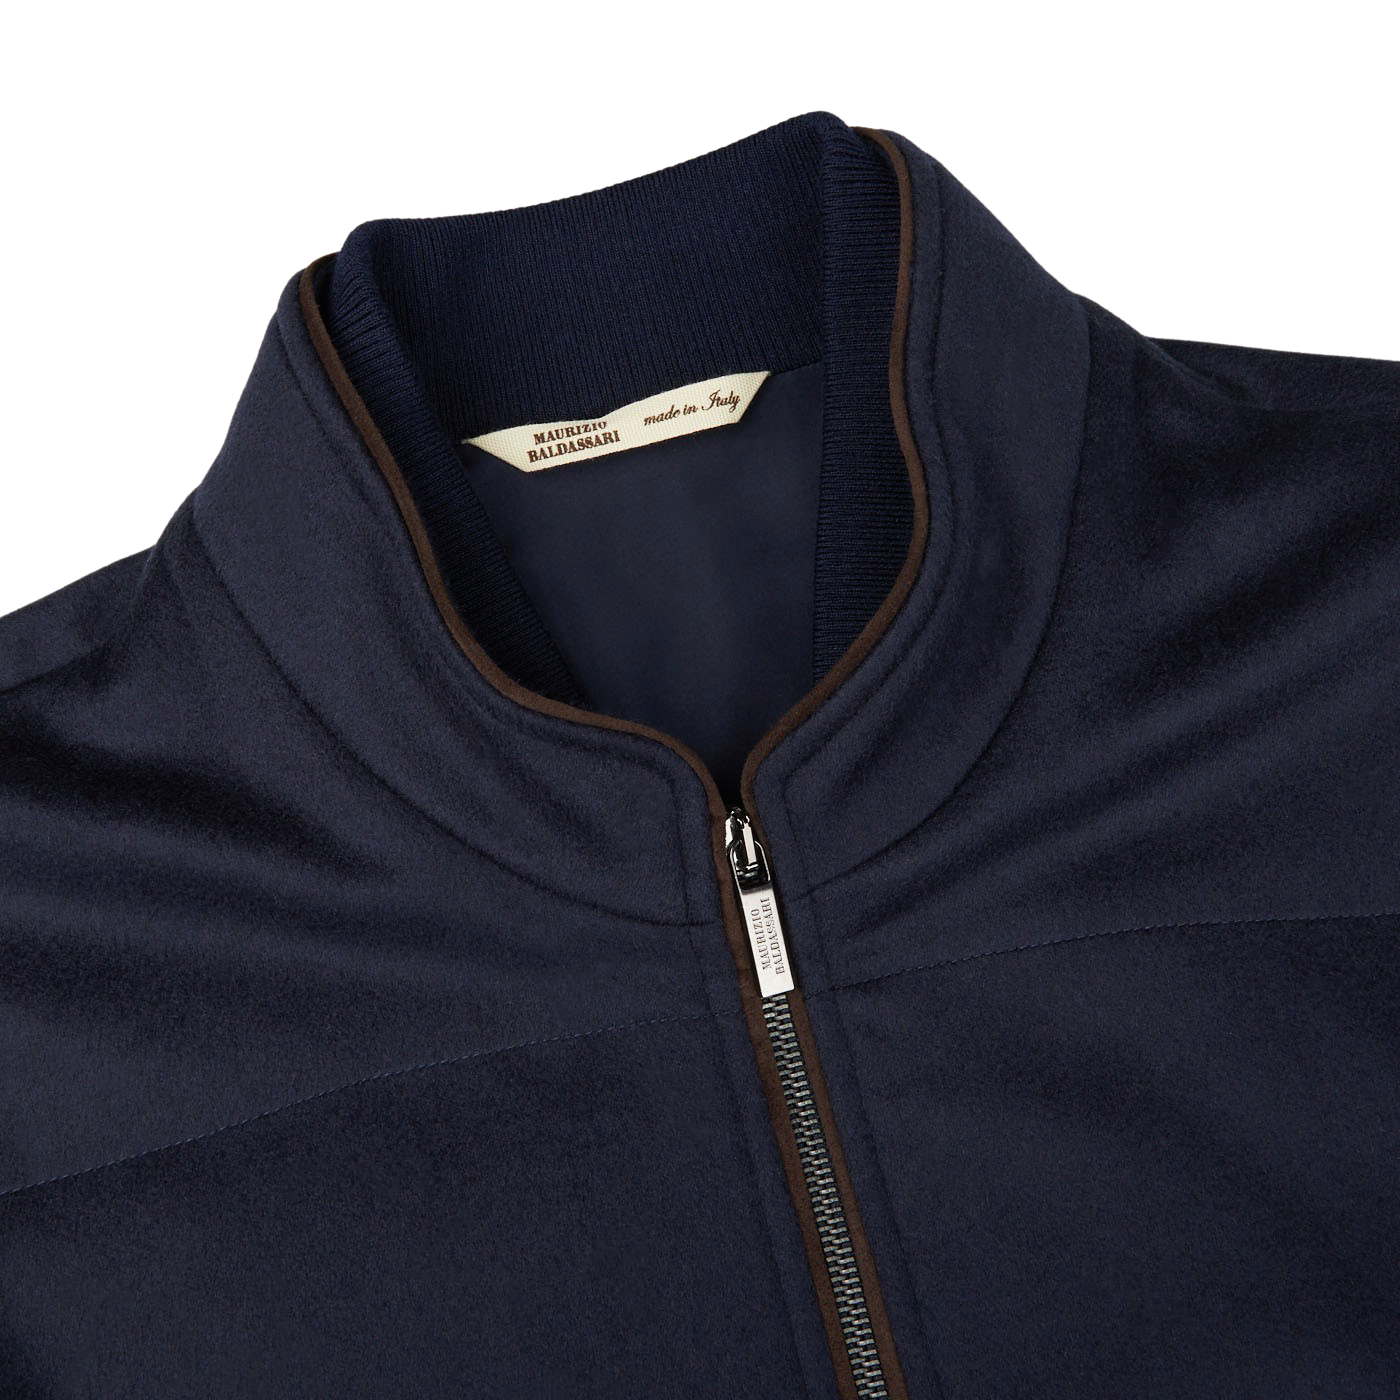 The Maurizio Baldassari Navy Water Repellent Pure Cashmere Gilet, made of cashmere, is shown on a white background.